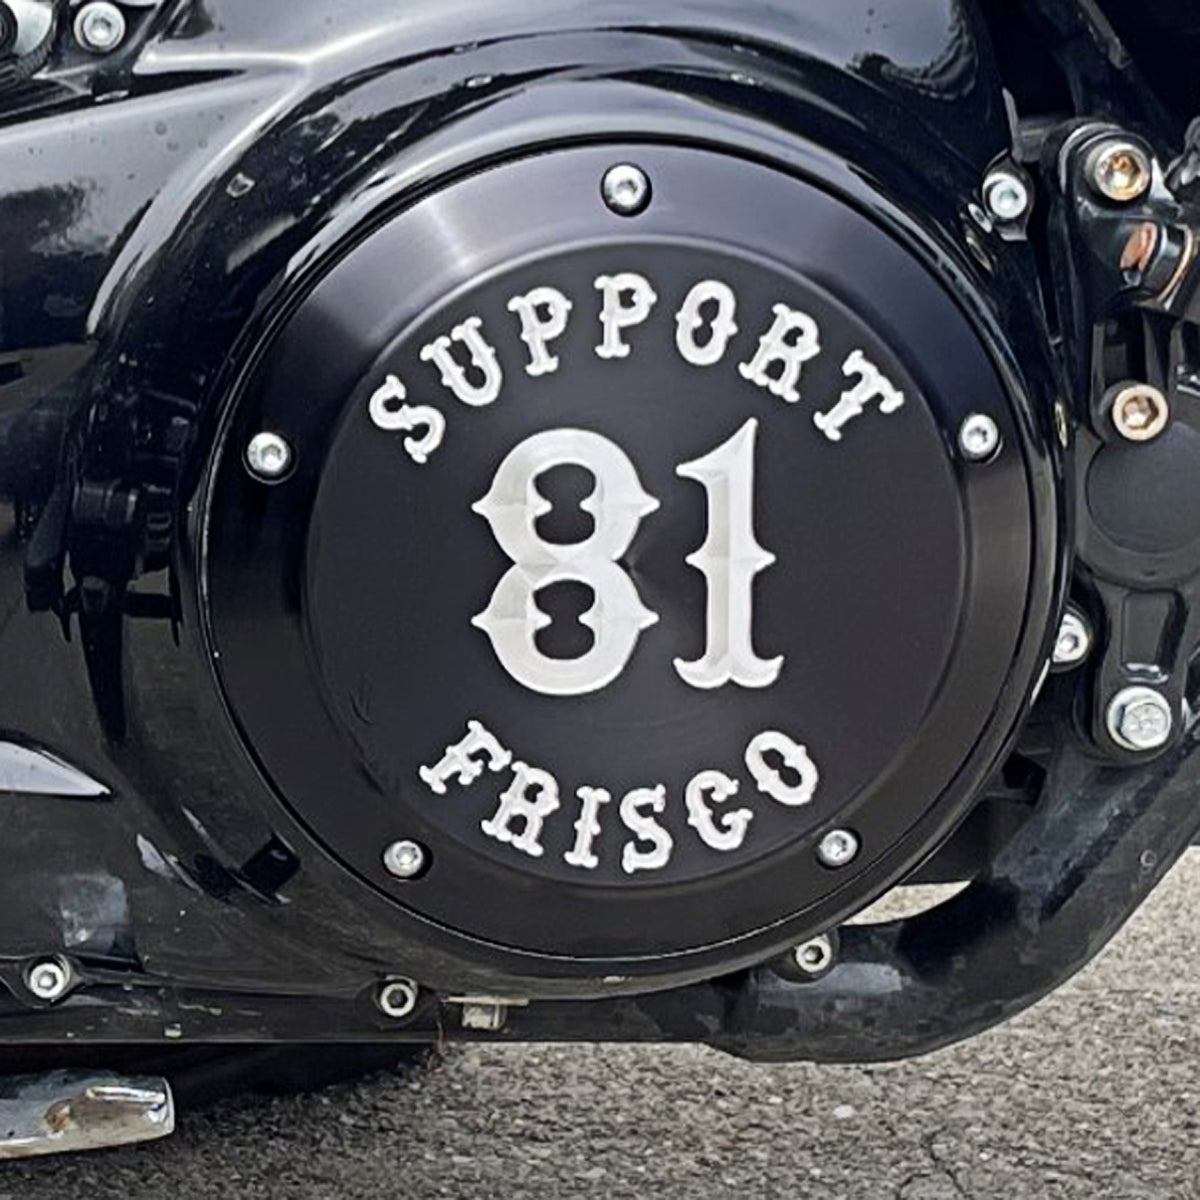 Derby Cover - Support 81 Frisco